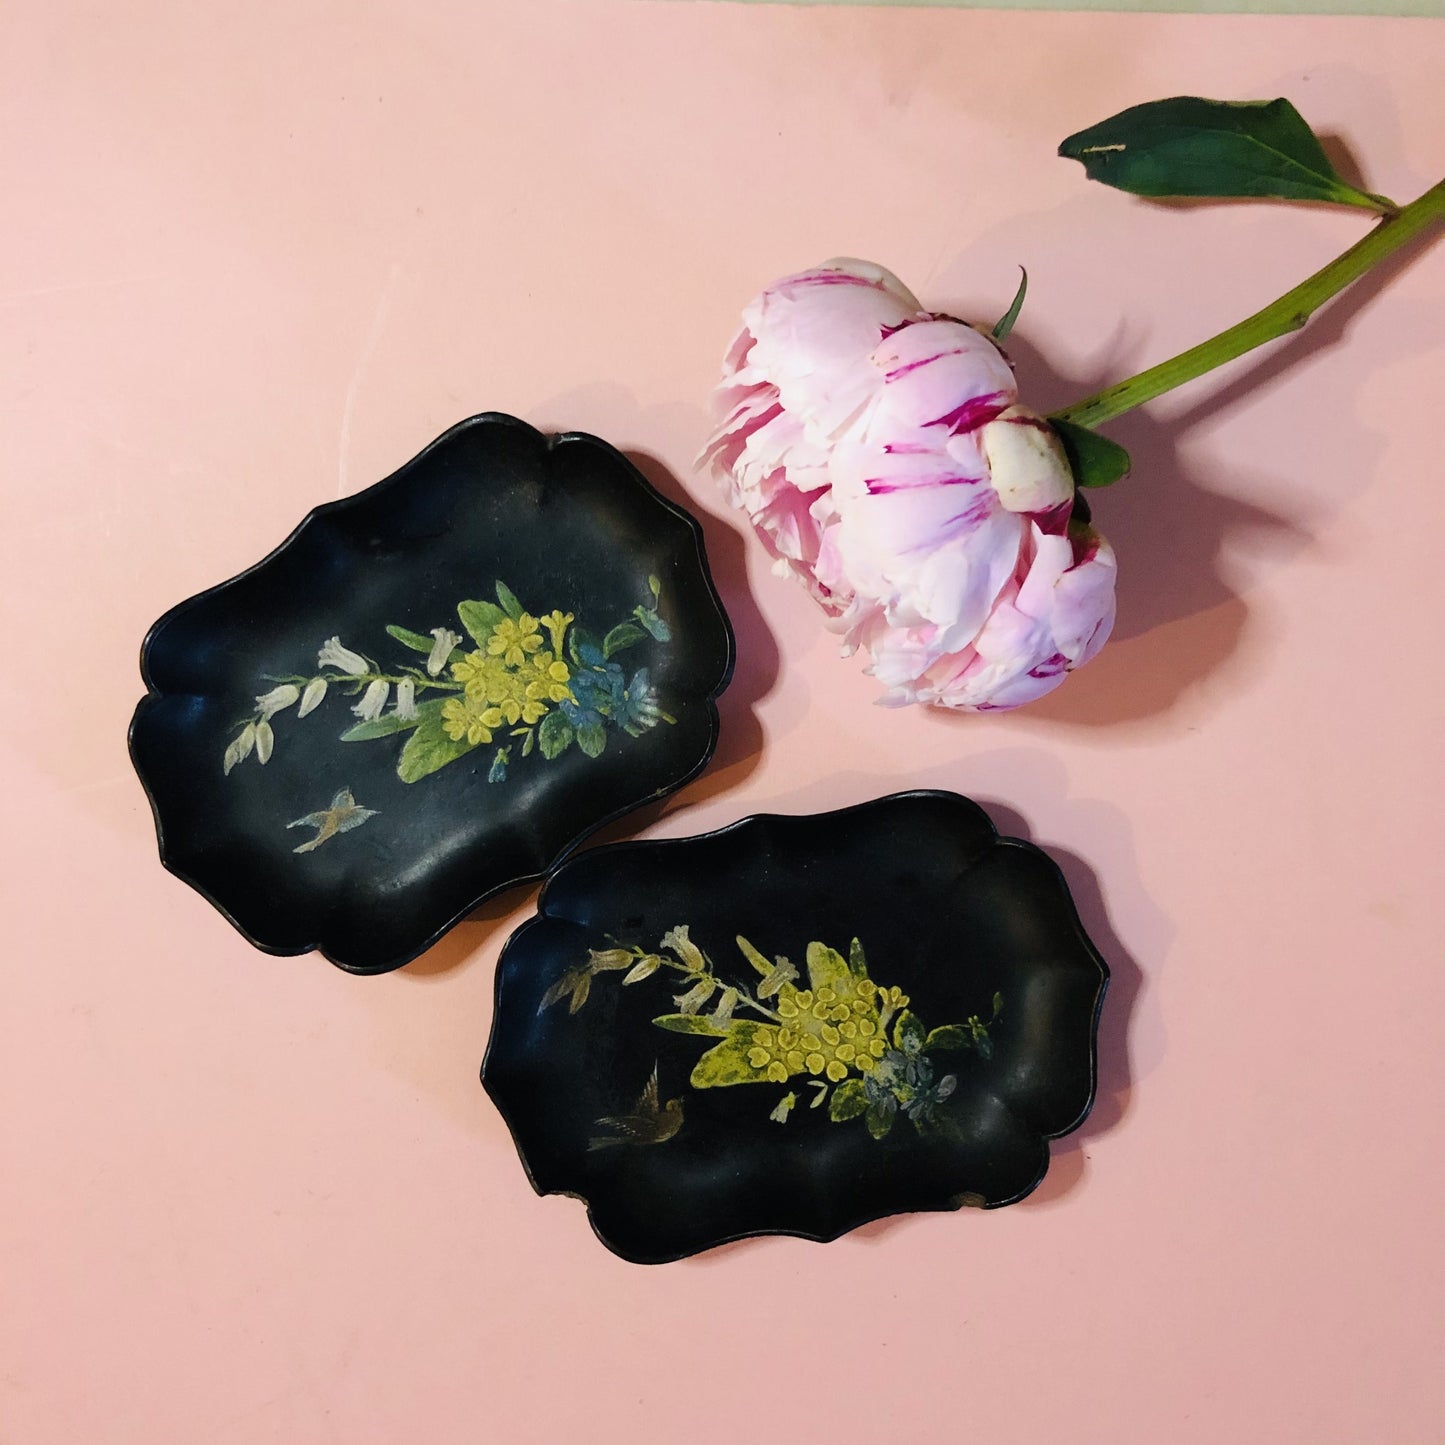 Antique Paper Mache Lacquer Scalloped Dishes with Hand Painted Flowers